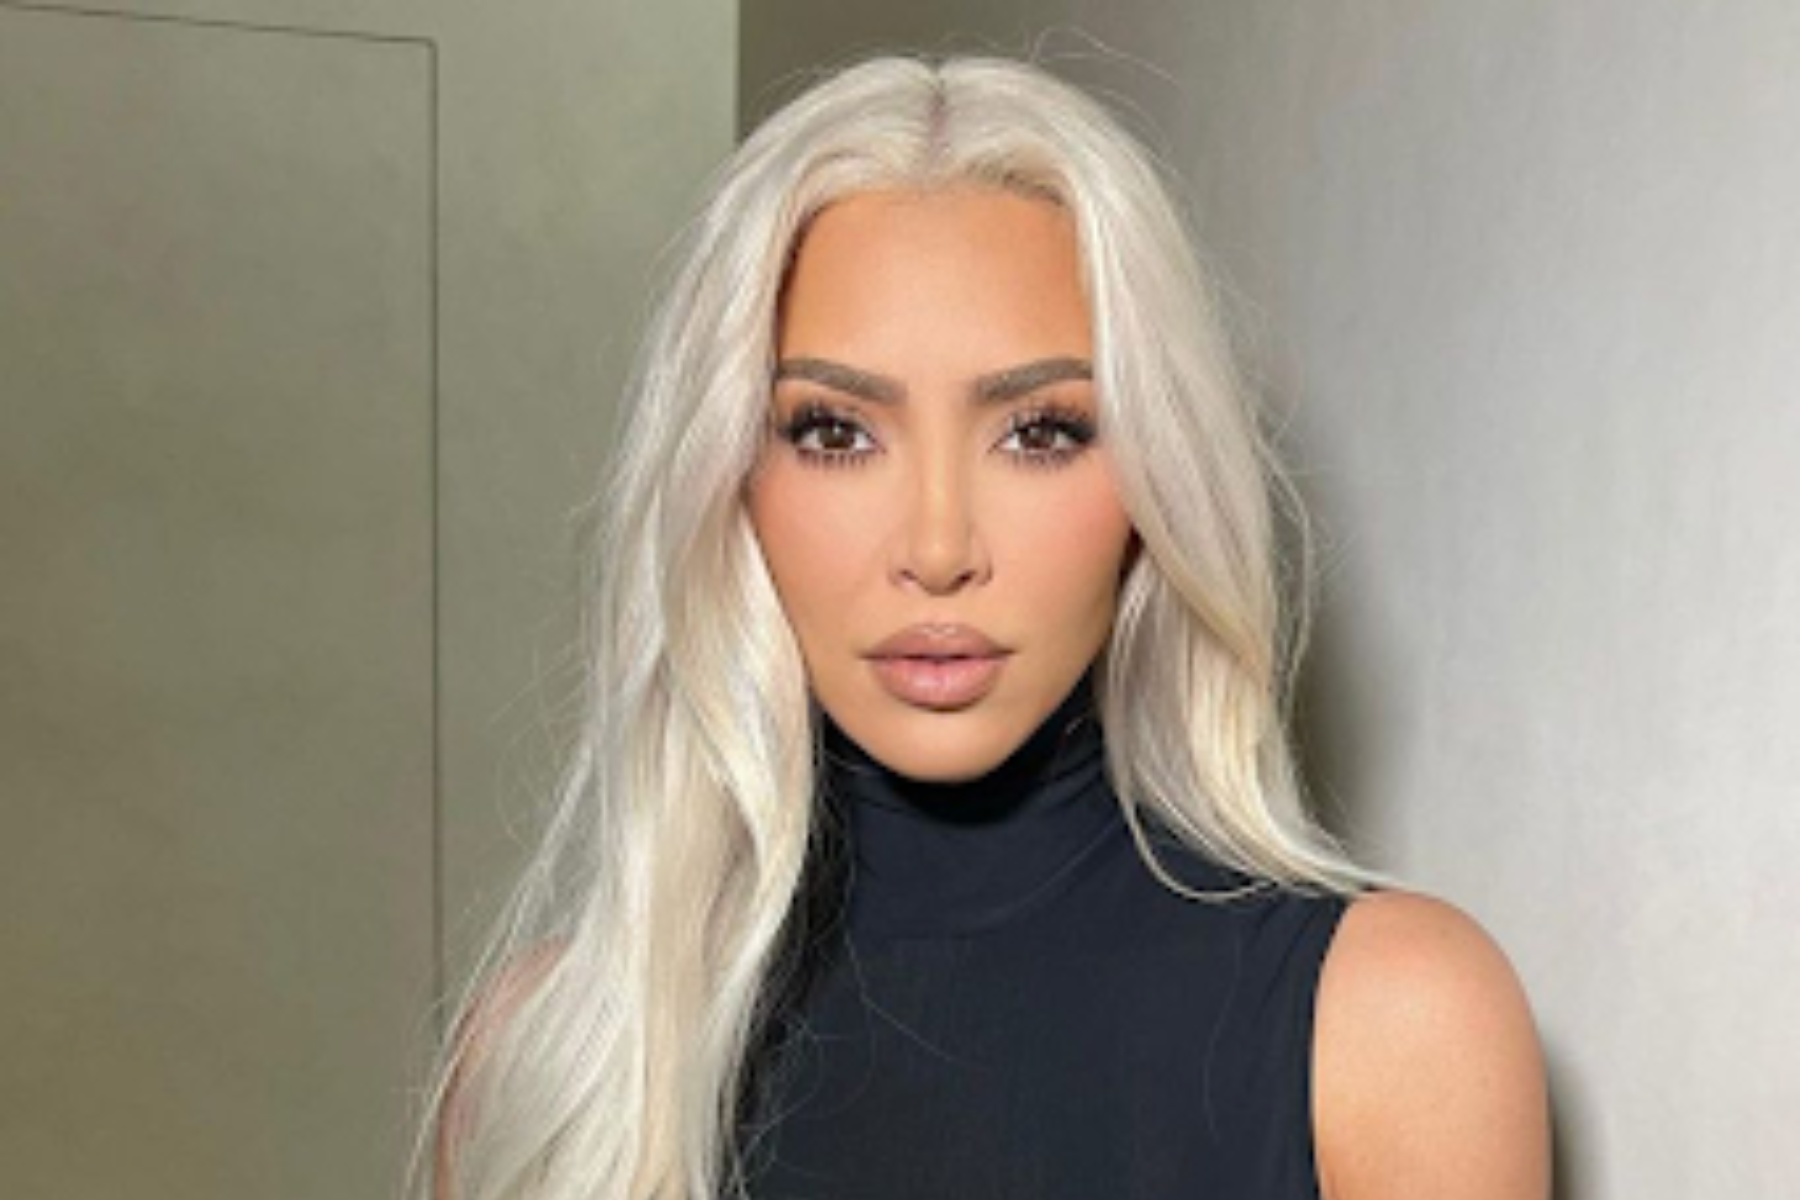 Image of Kim Kardashian with extensions in bleach blonde. Taken from Pexels